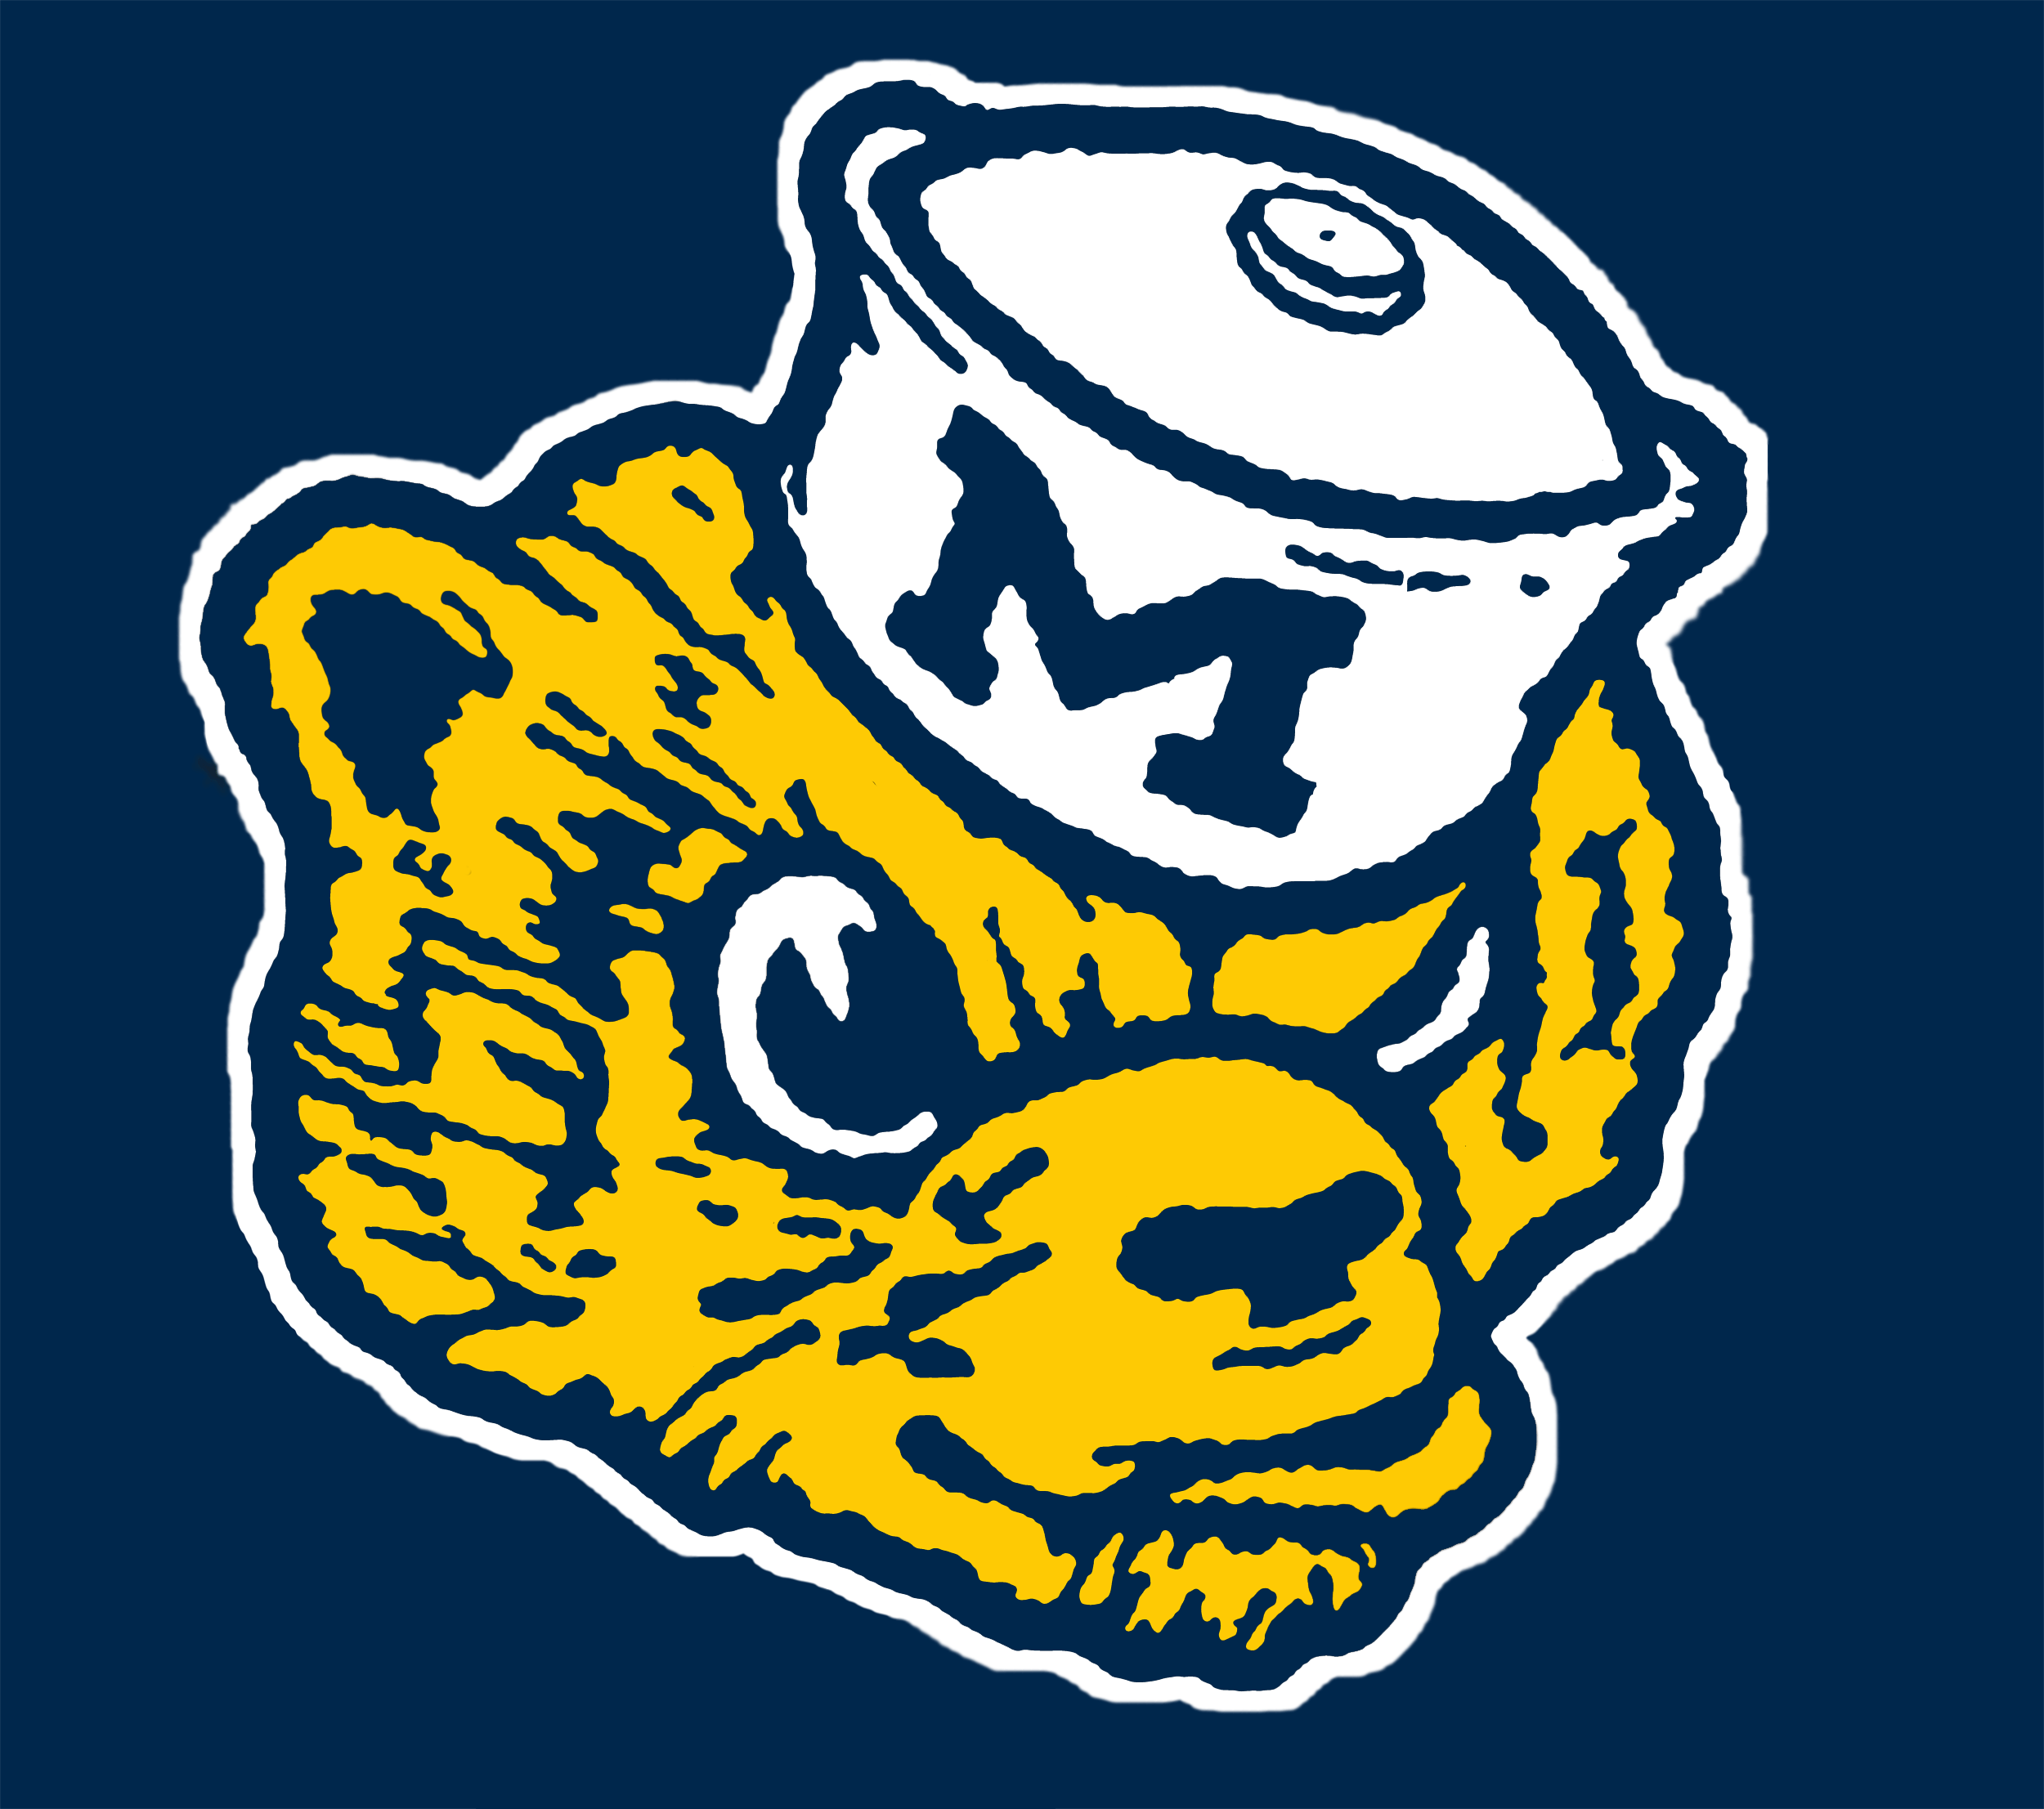 Michigan Football Logo - So, after looking at vintage logos. how did the College Football